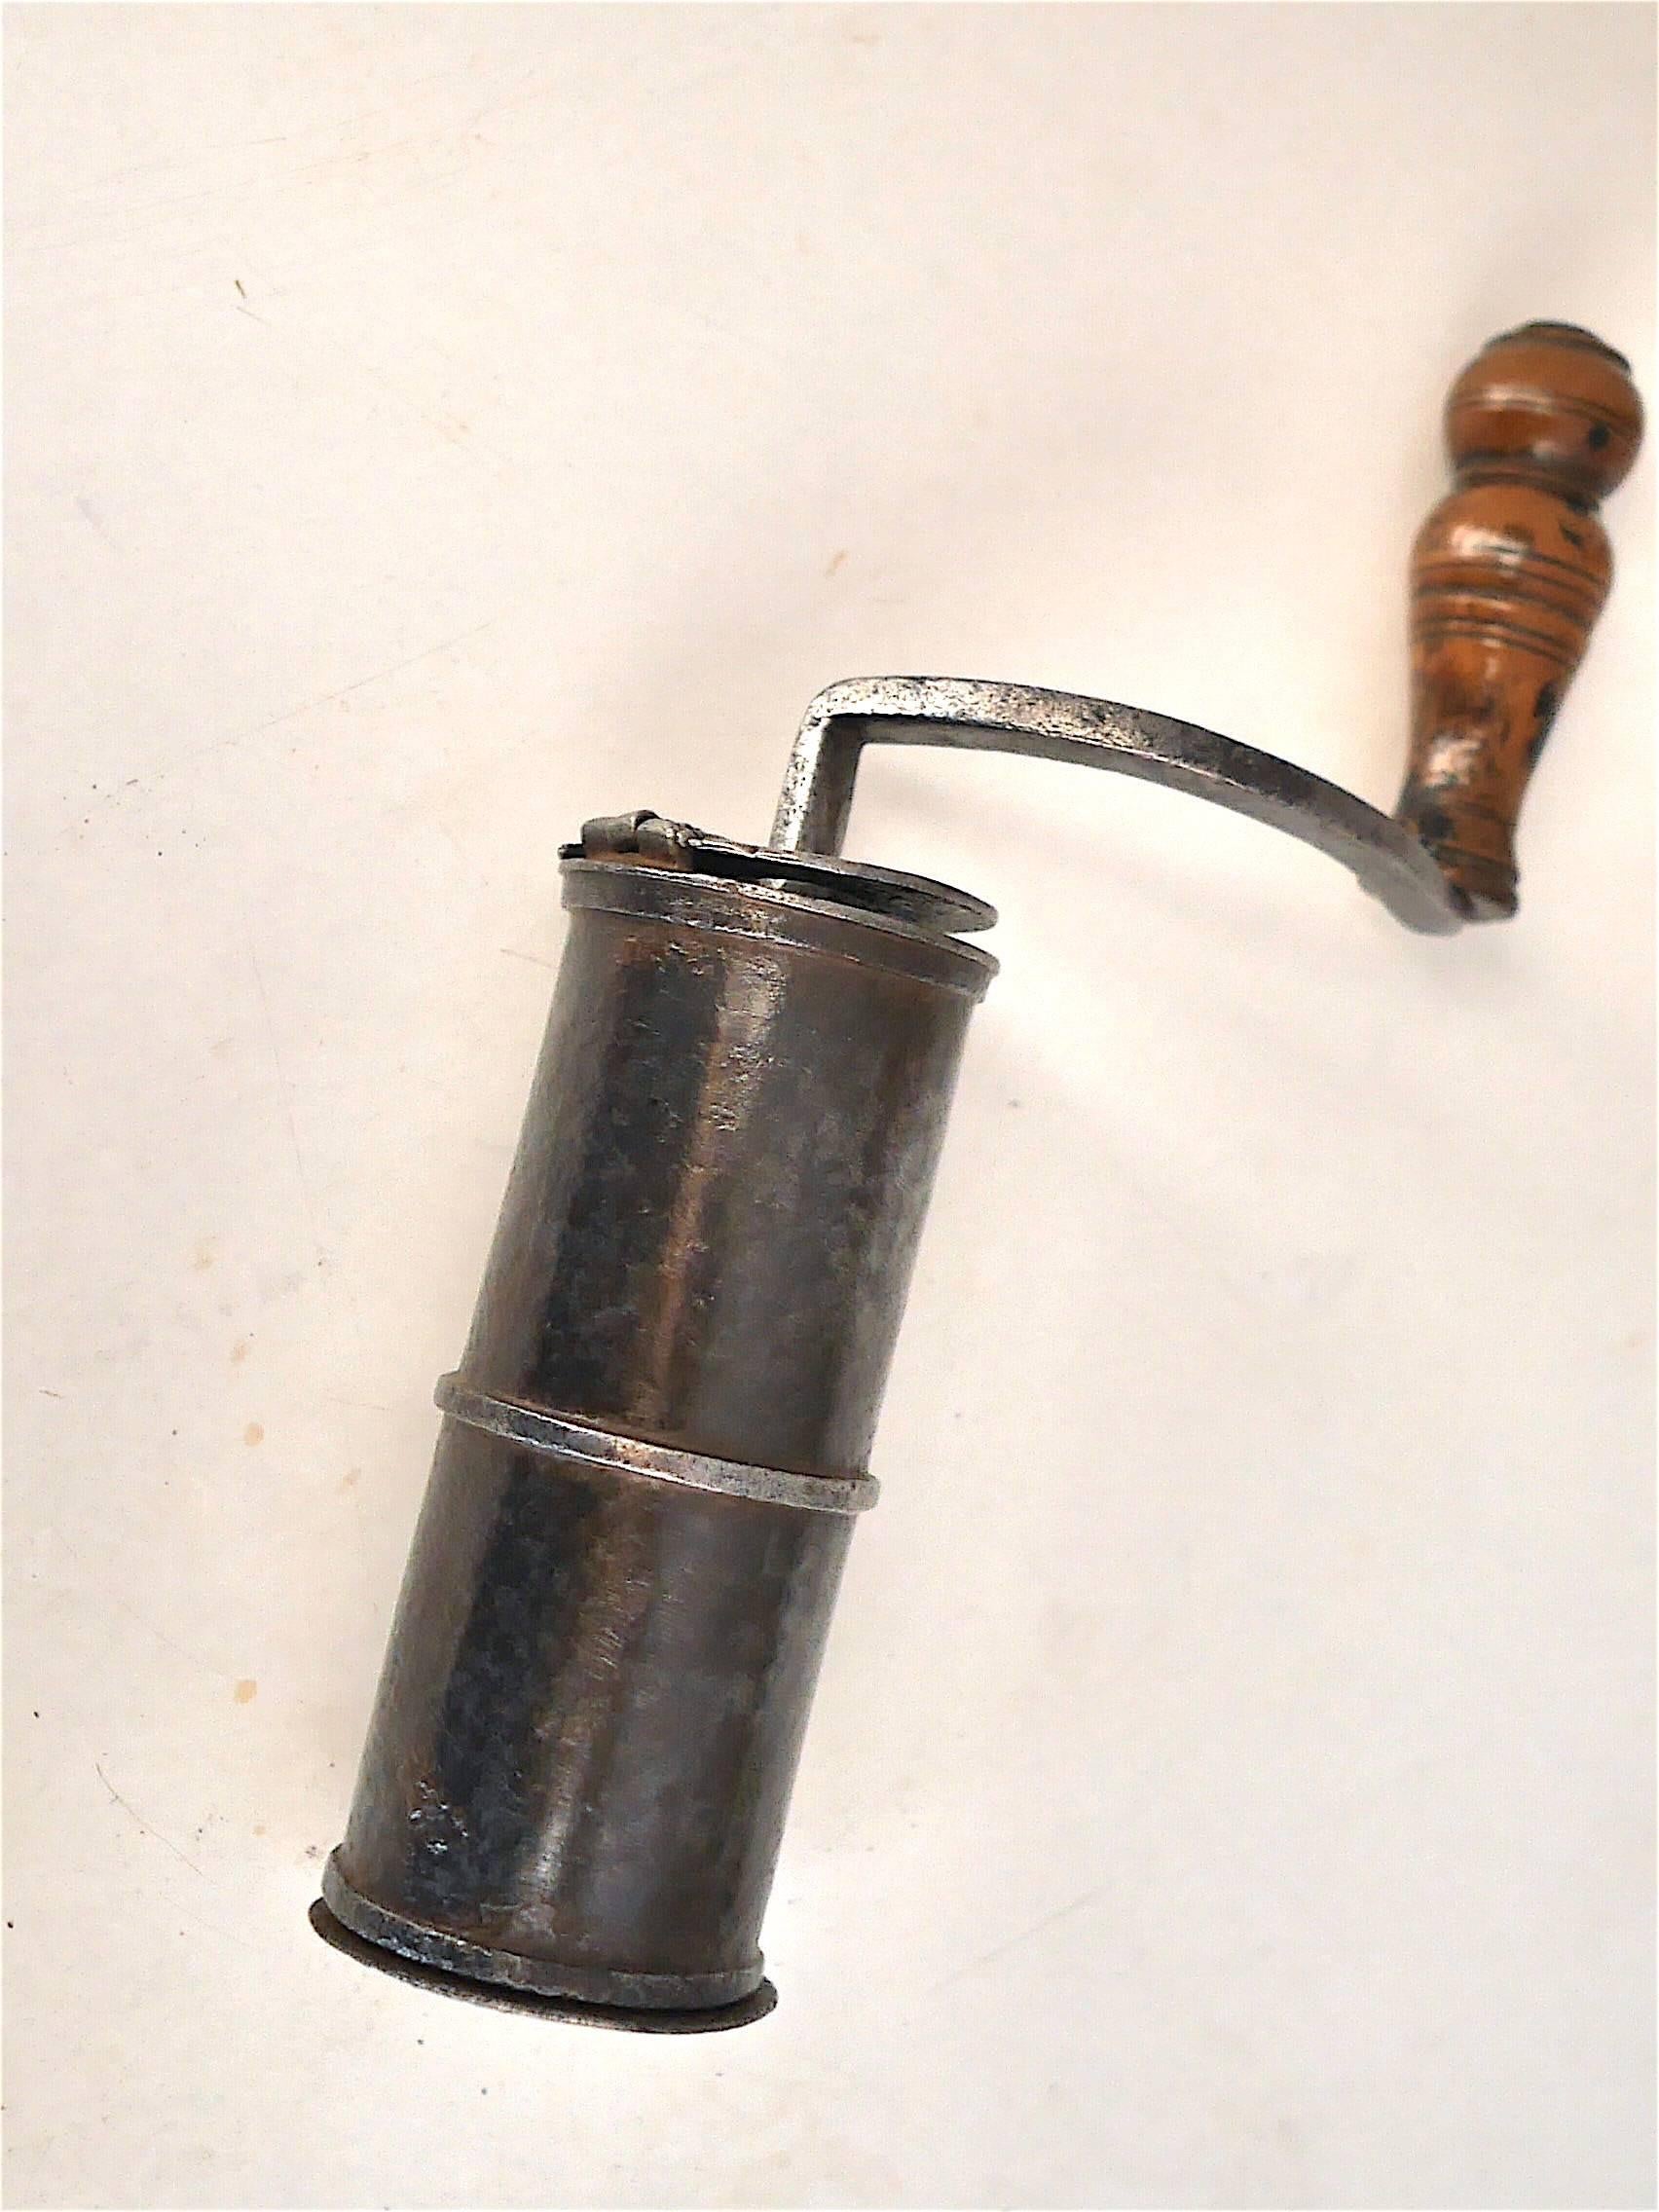 Early 18th century wrought iron pocket coffee grinder, attributed to Jean Blan.